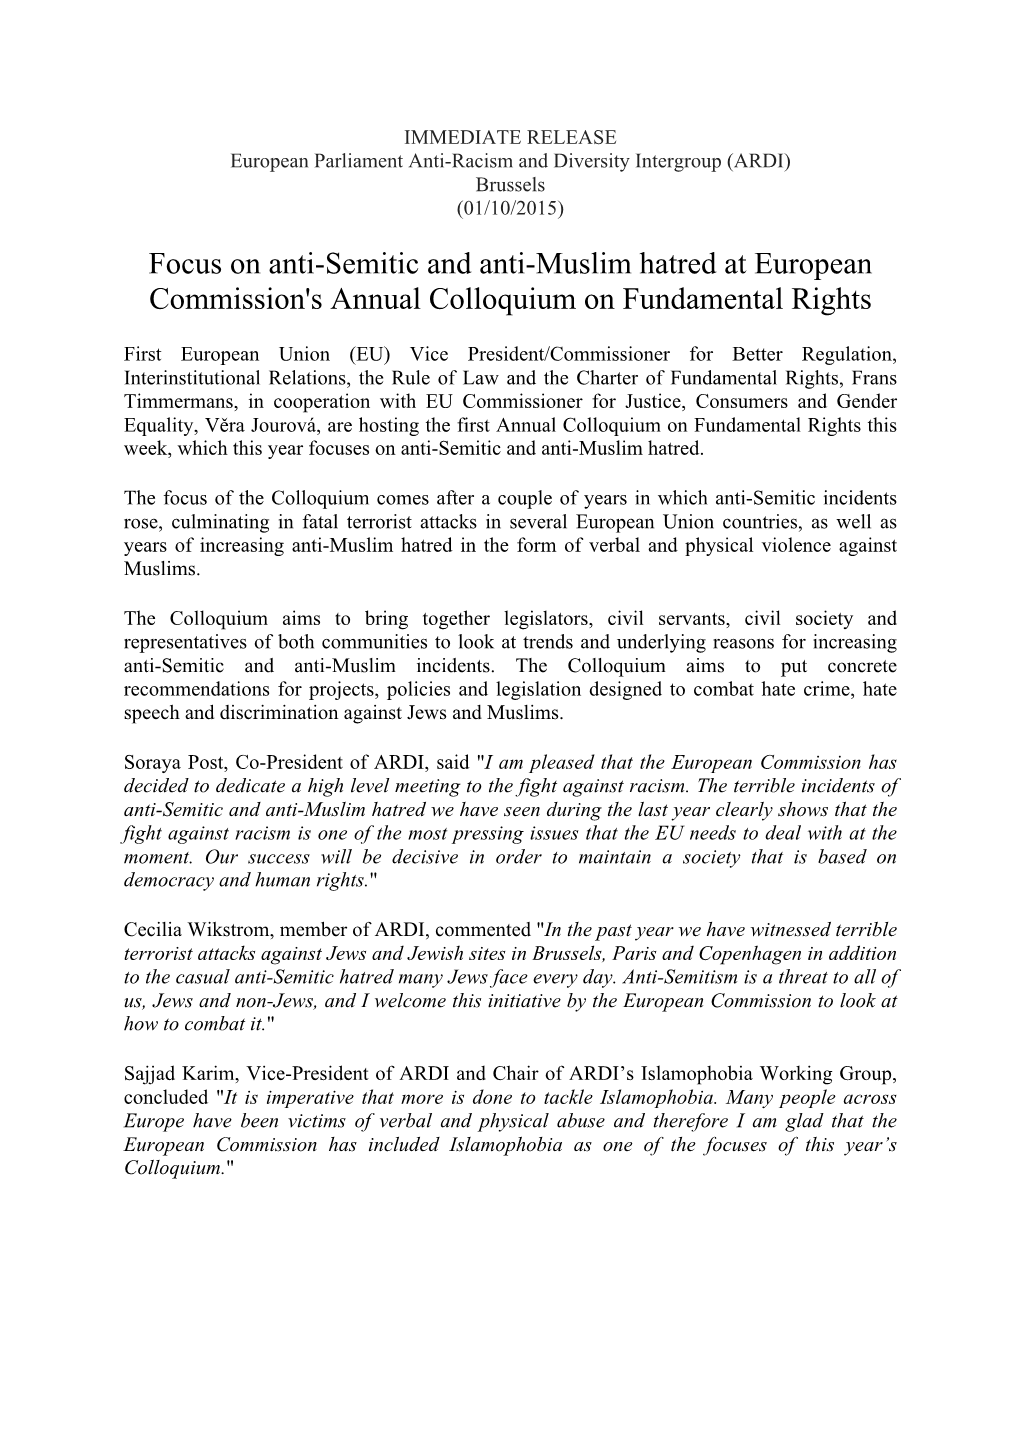 Focus on Anti-Semitic and Anti-Muslim Hatred at European Commission's Annual Colloquium on Fundamental Rights